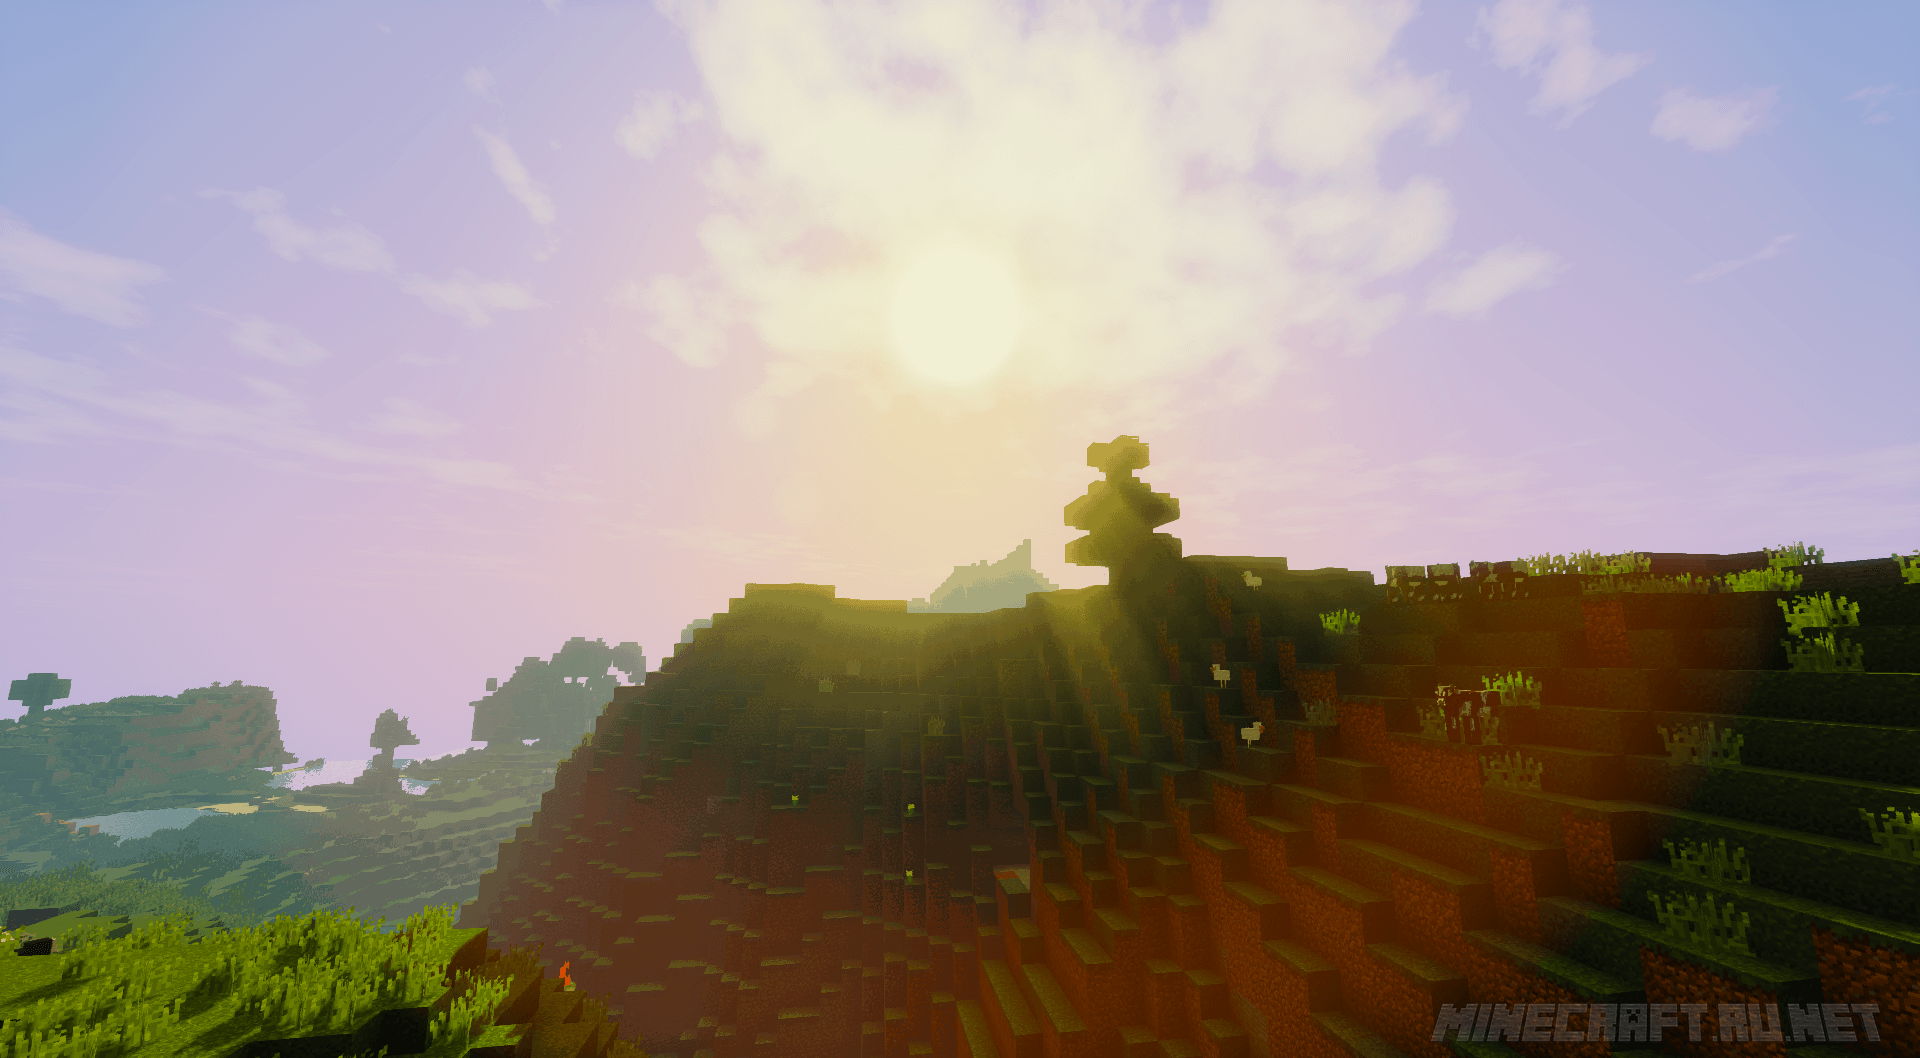 minecraft shaders mod free download